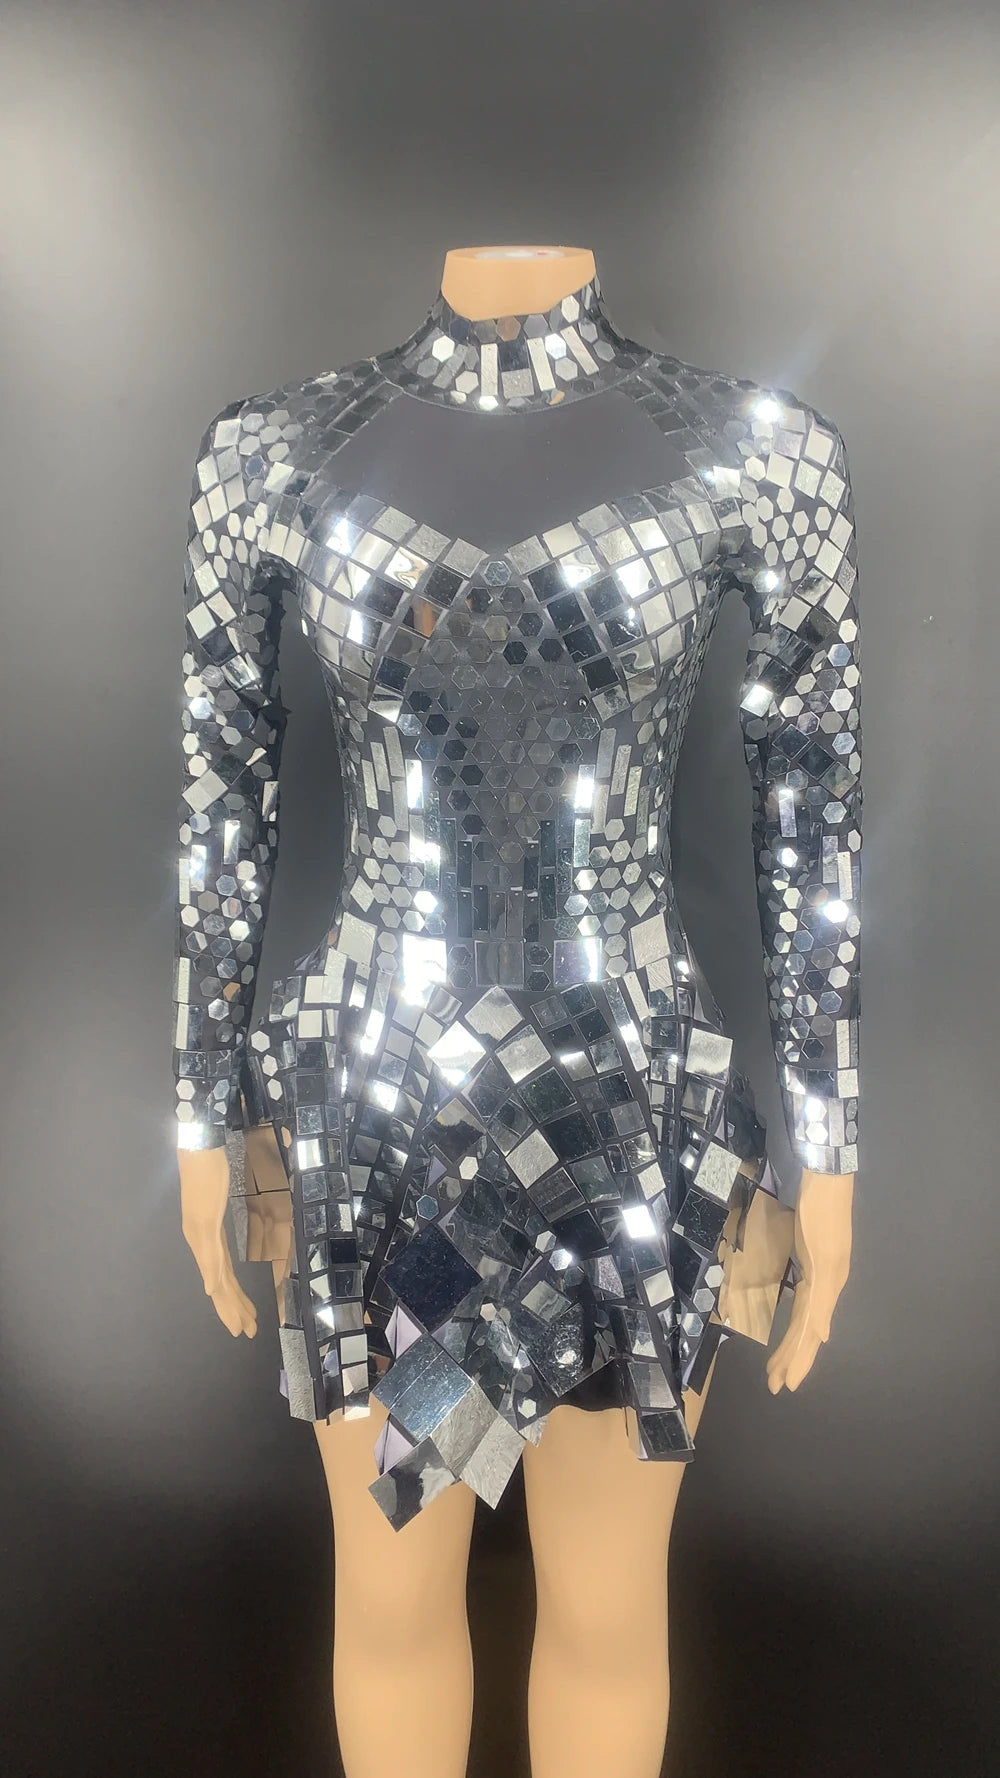 Sparkly Silver Sequin Short Dress Women Disco Ball Mirror Outfit Dance Costume Party Festival Doof Wear (7 Colours!)